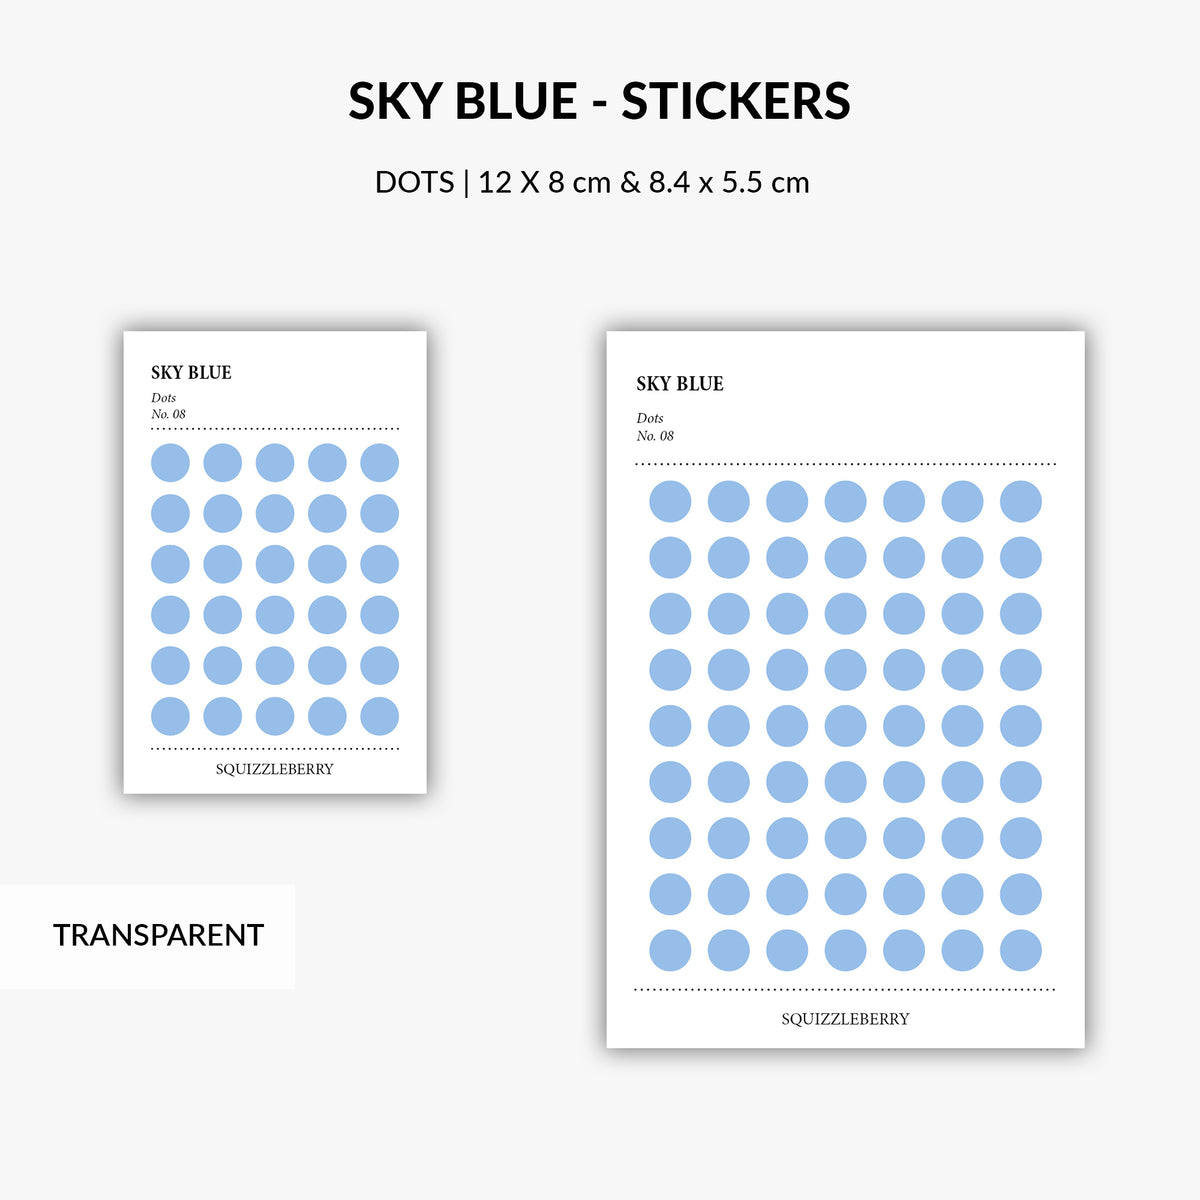 blue stickers printed on transparent paper